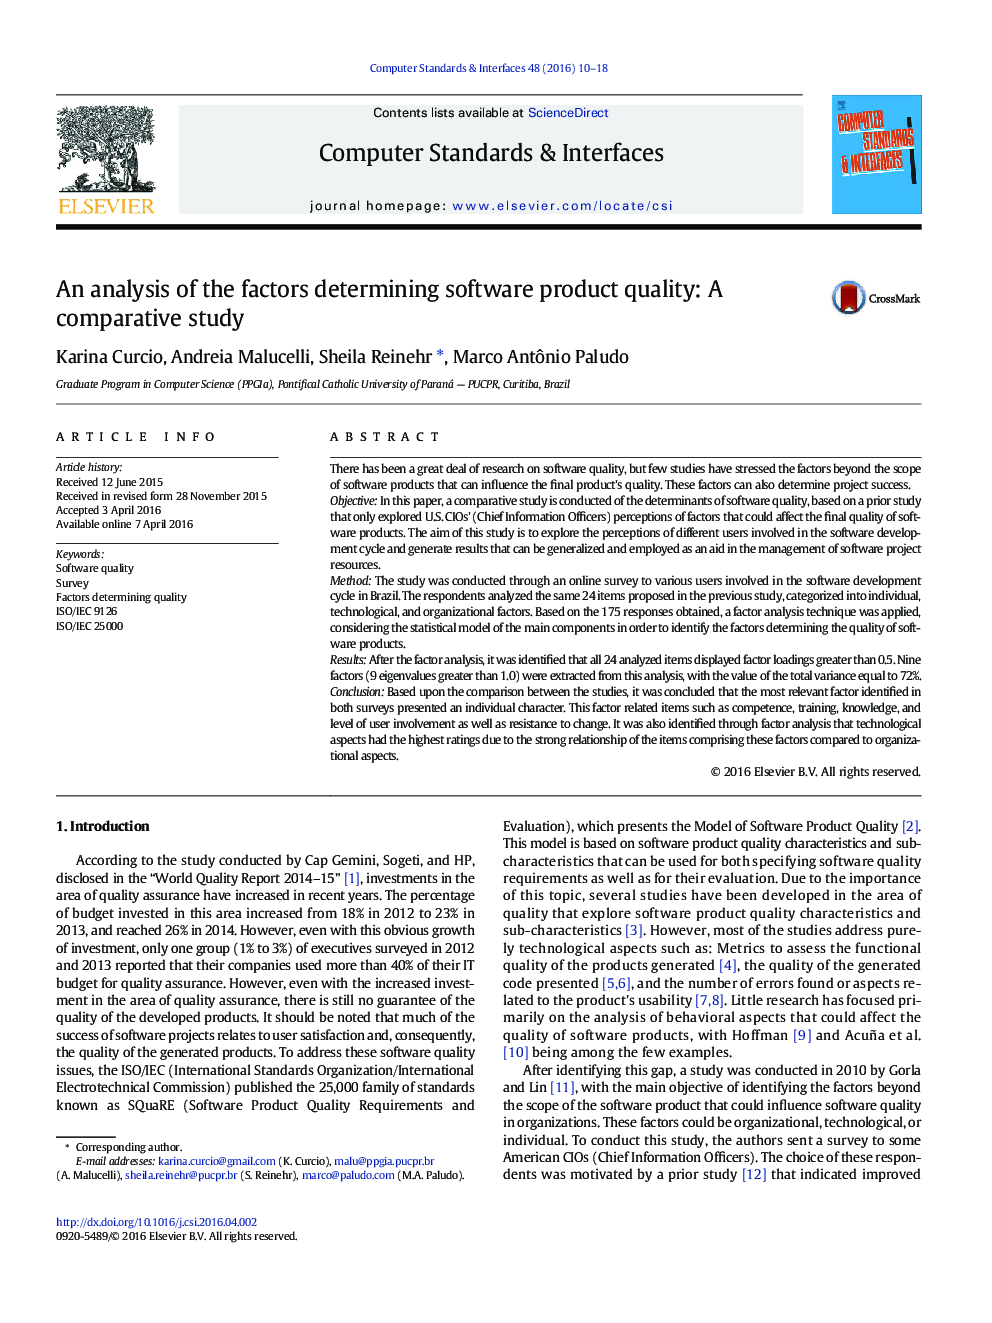 An analysis of the factors determining software product quality: A comparative study